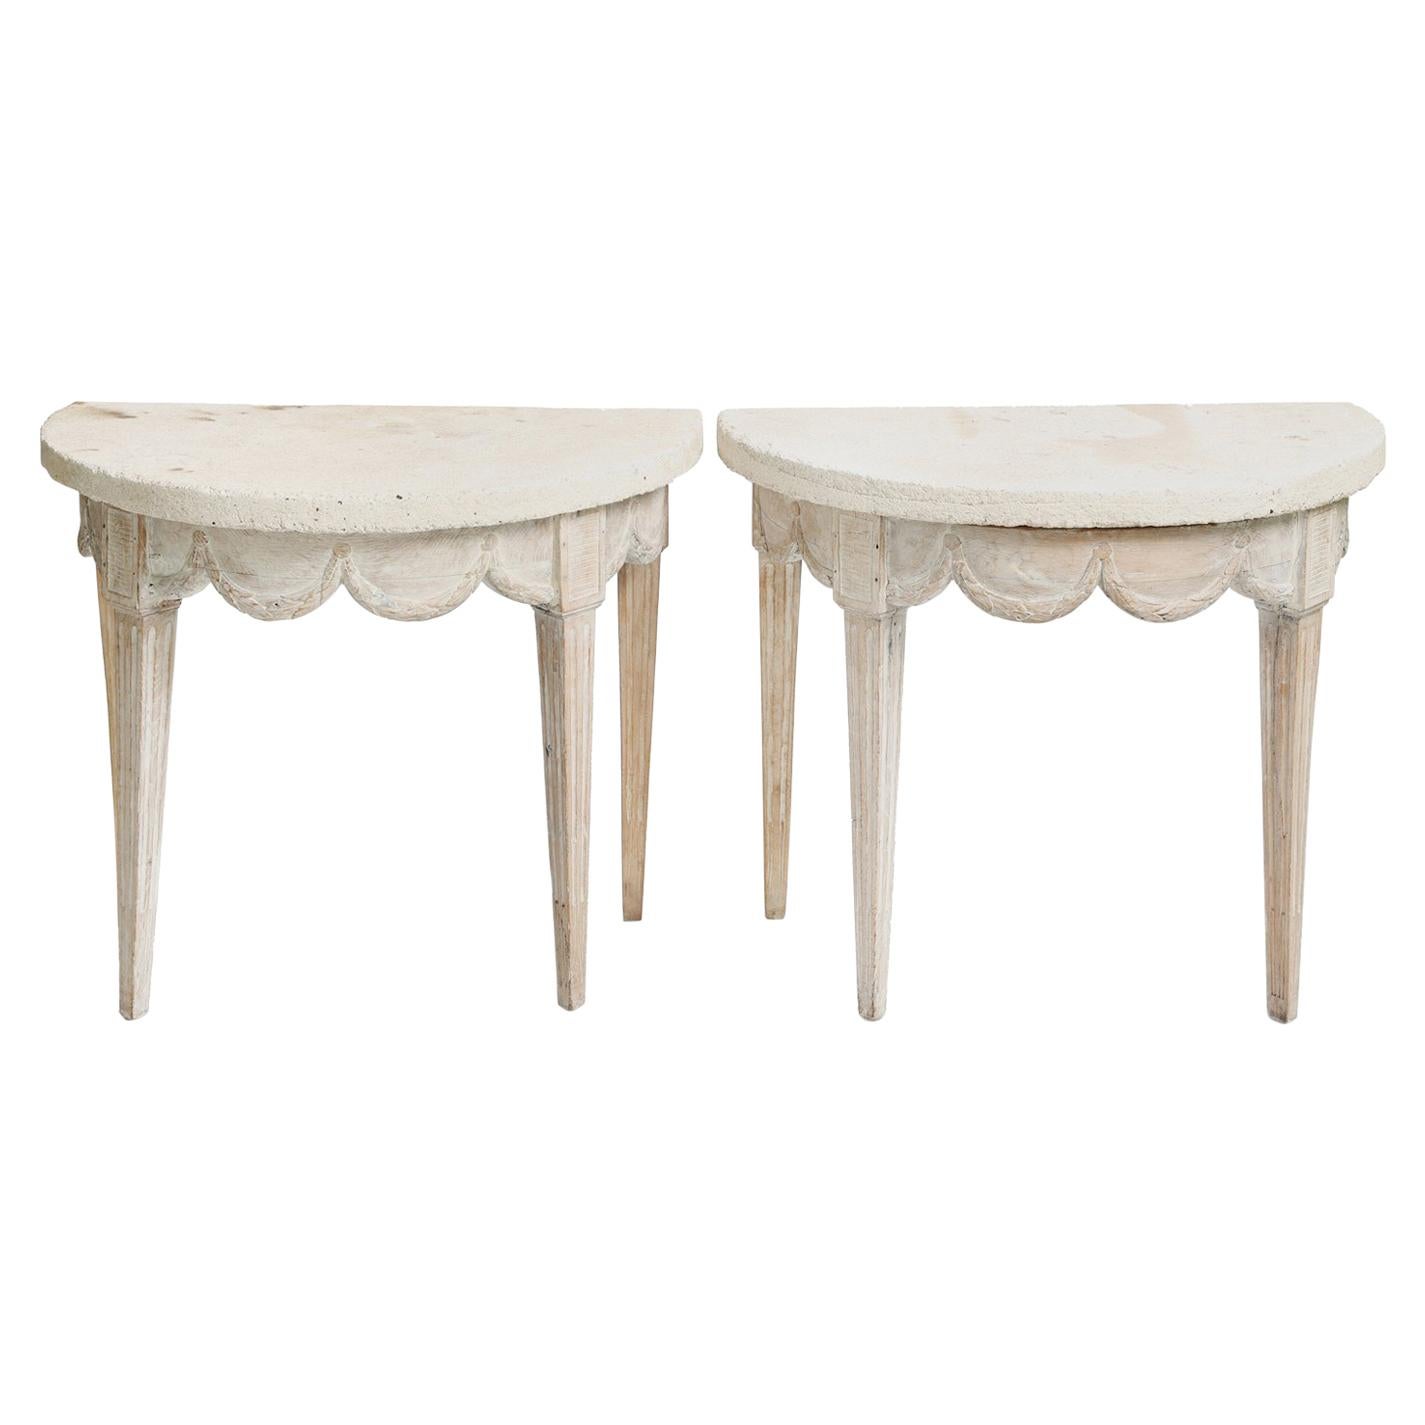 Pair of 18th Century French Demilune Consoles with Concrete Tops